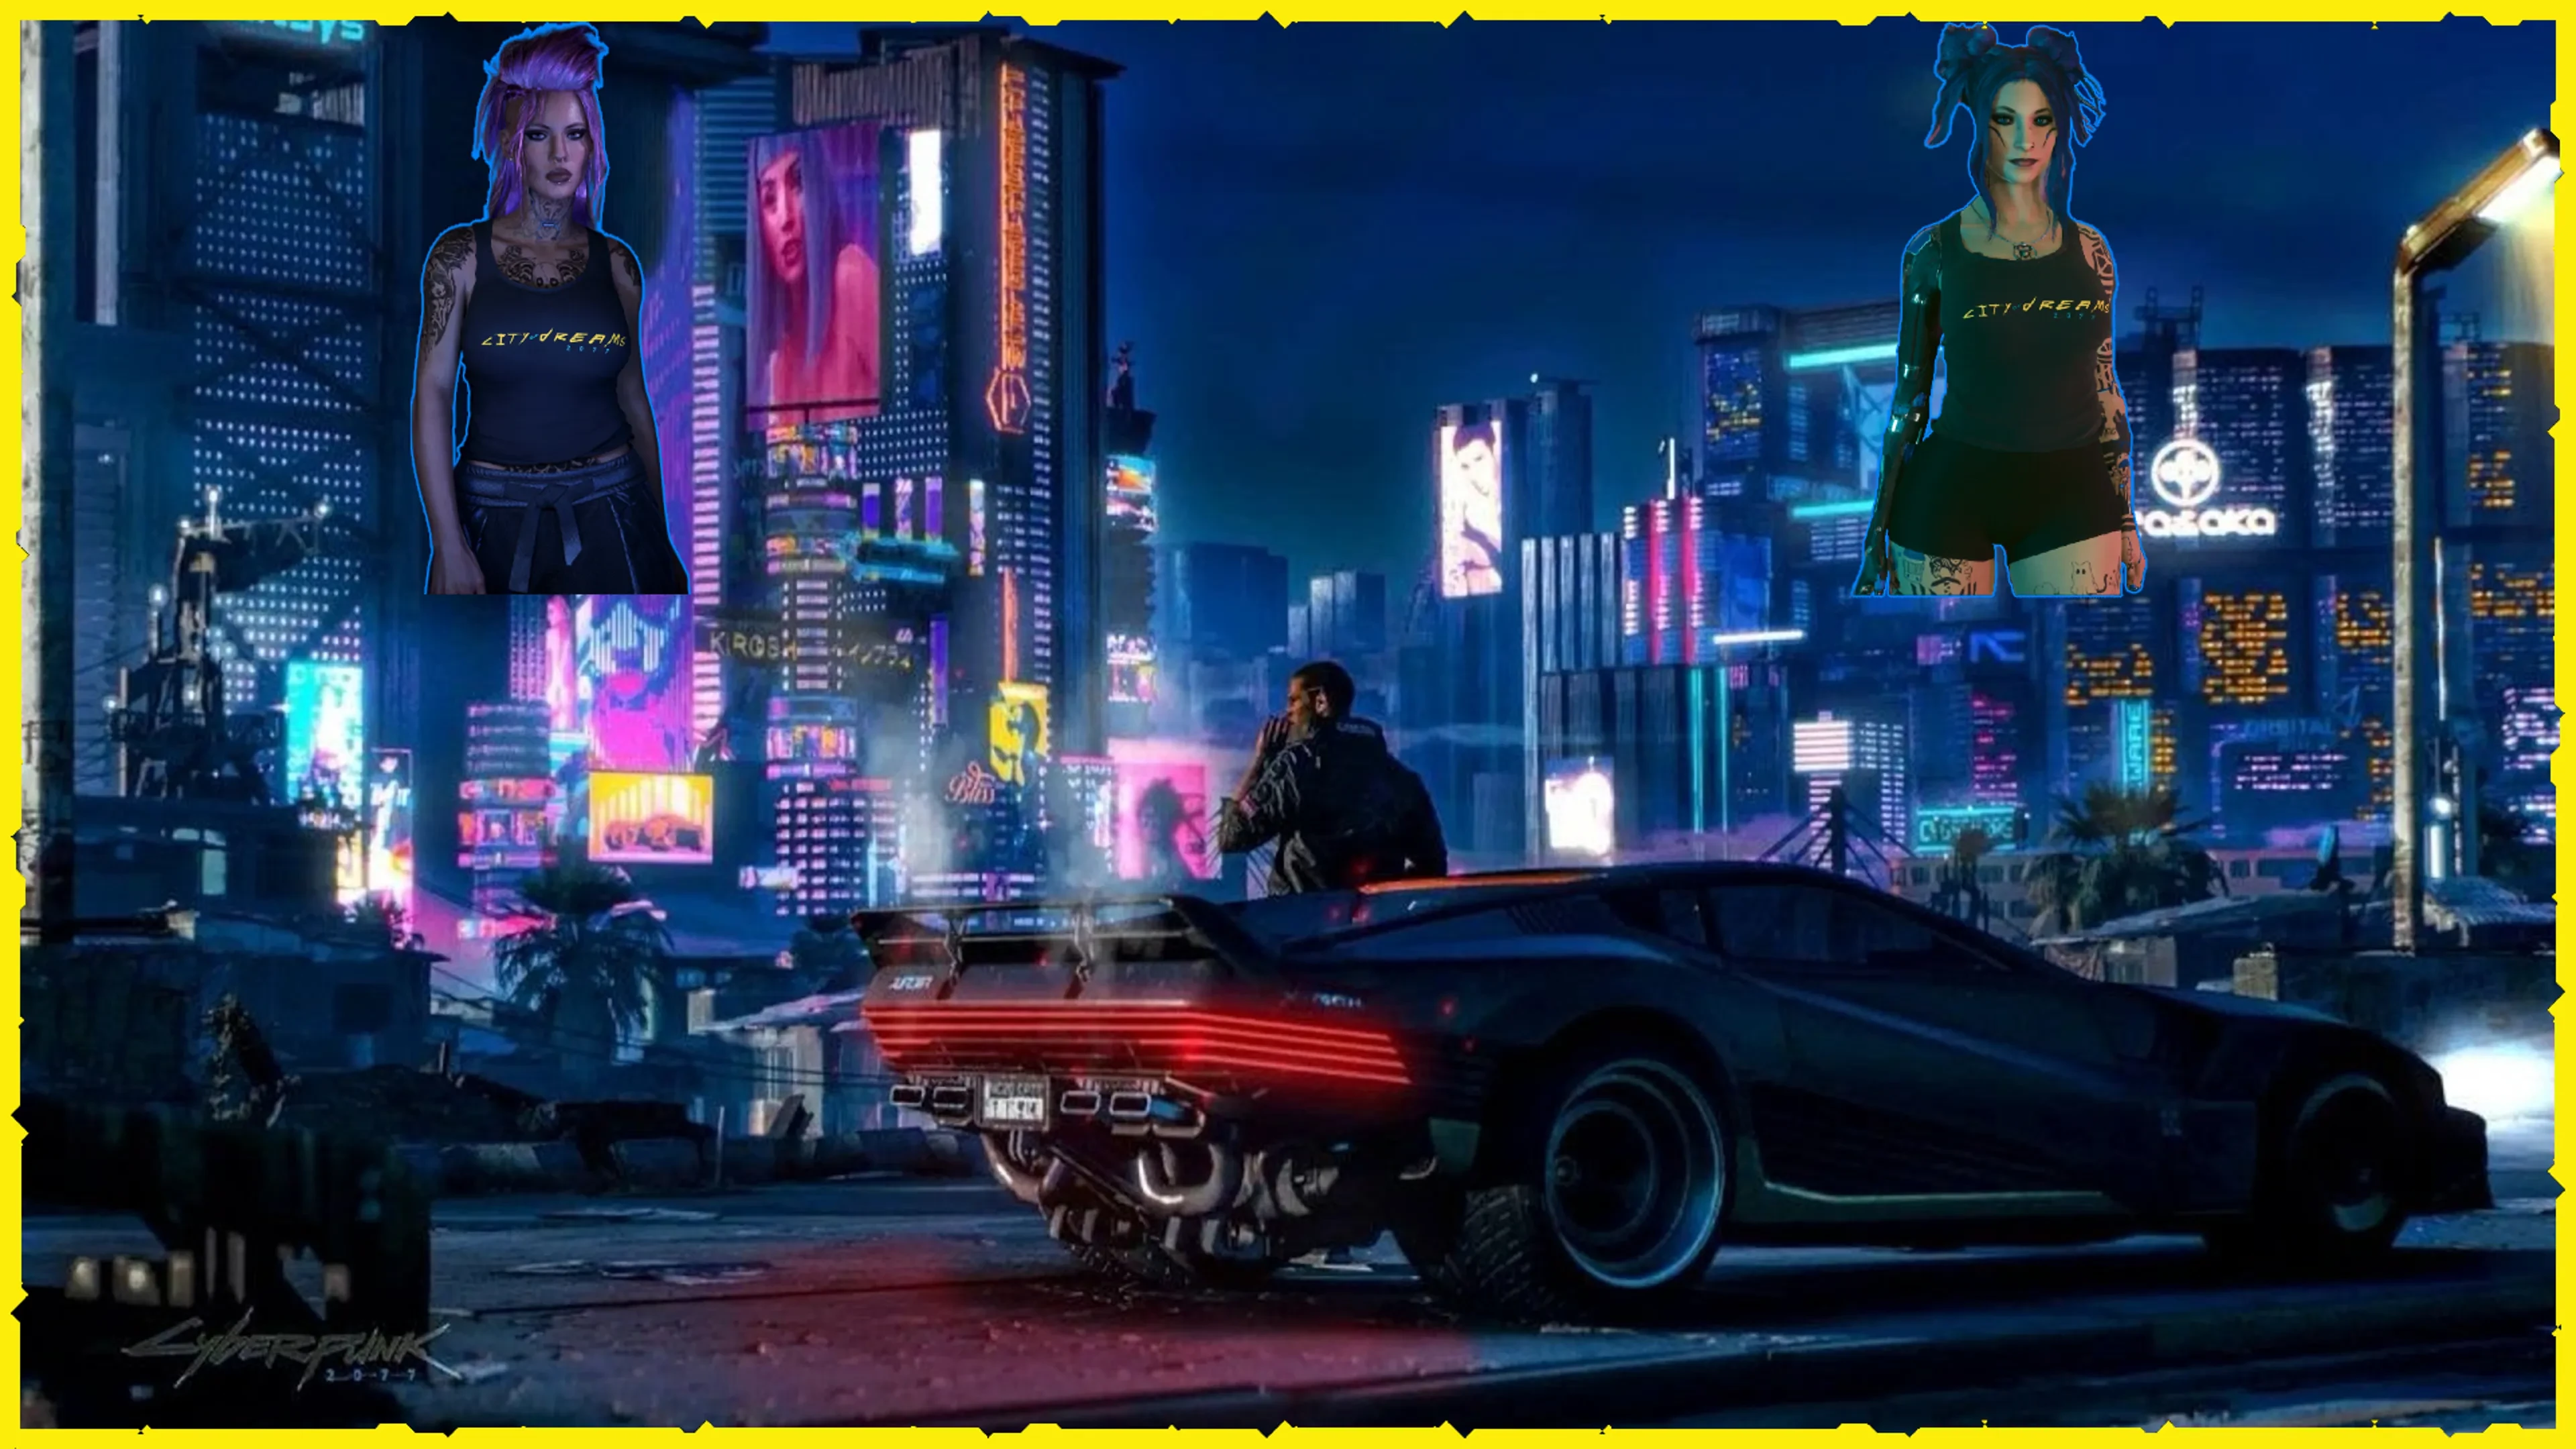 GitHub - 2077v2/City-of-Dreams: Hey, Chooms v2 here this is the CITY OF  DREAMS for Cyberpunk 2077. This isn't just a mod list we have slapped  together this is a whole new world